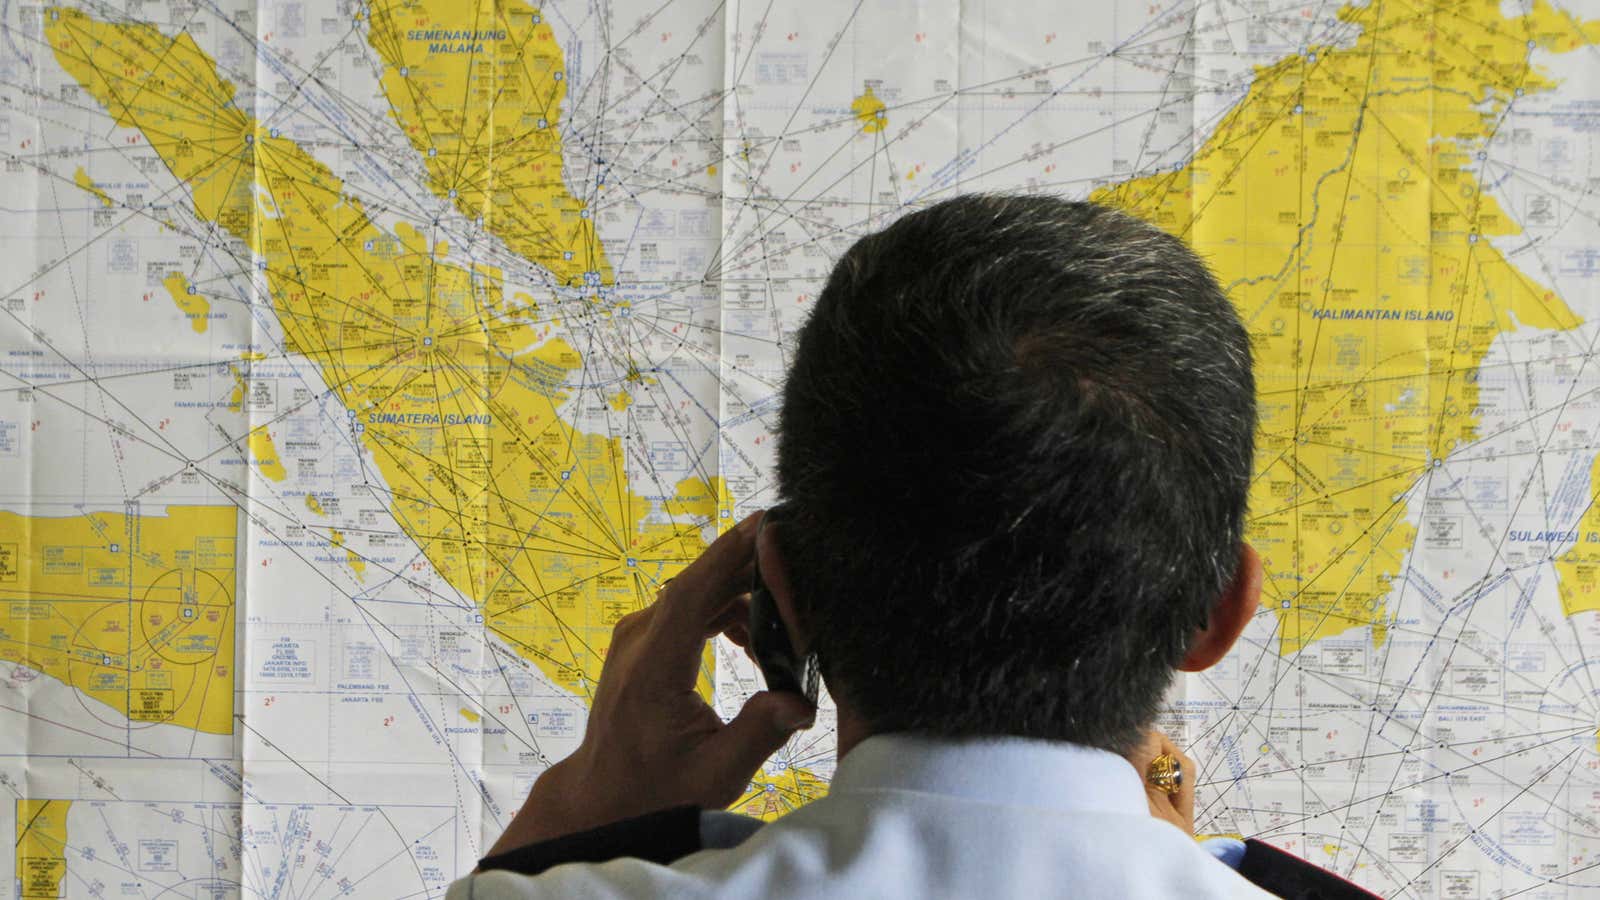 An airport official checks a map of Indonesia at the crisis center set up by local authority for the missing AirAsia flight QZ8501, at Juanda International Airport in Surabaya, East Java, Indonesia.